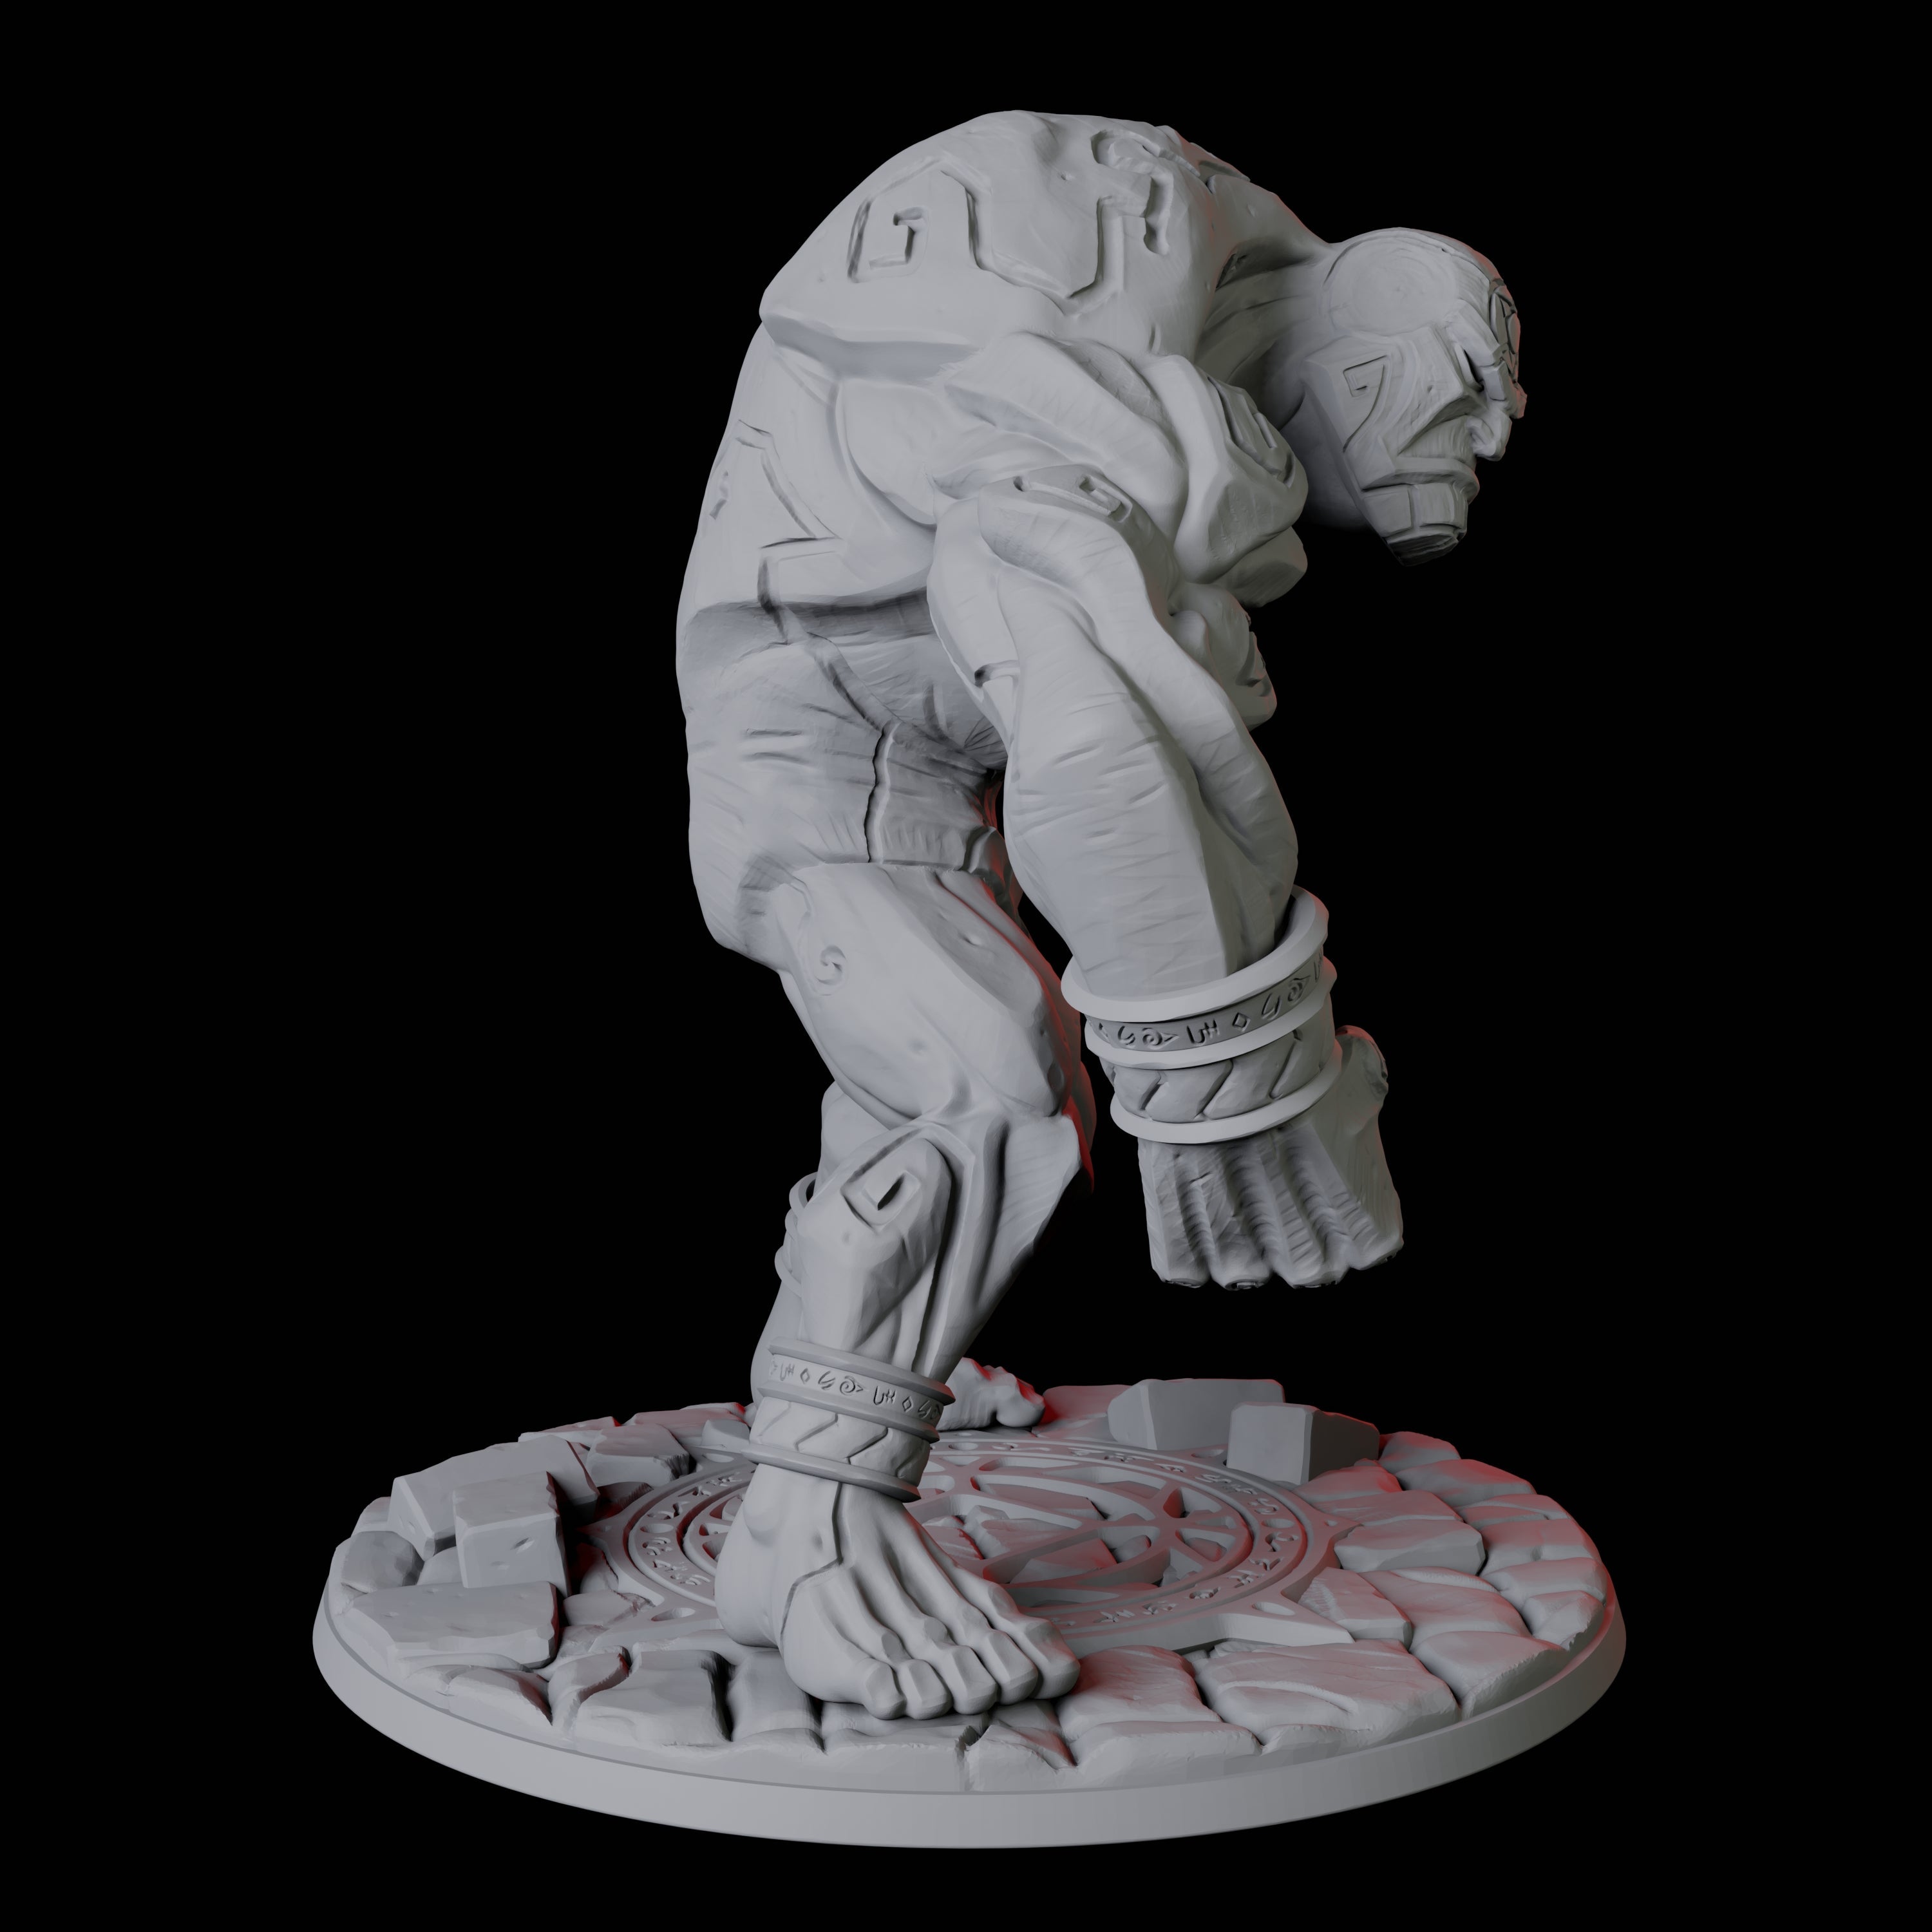 Activated Stone Golem Miniature for Dungeons and Dragons, Pathfinder or other TTRPGs